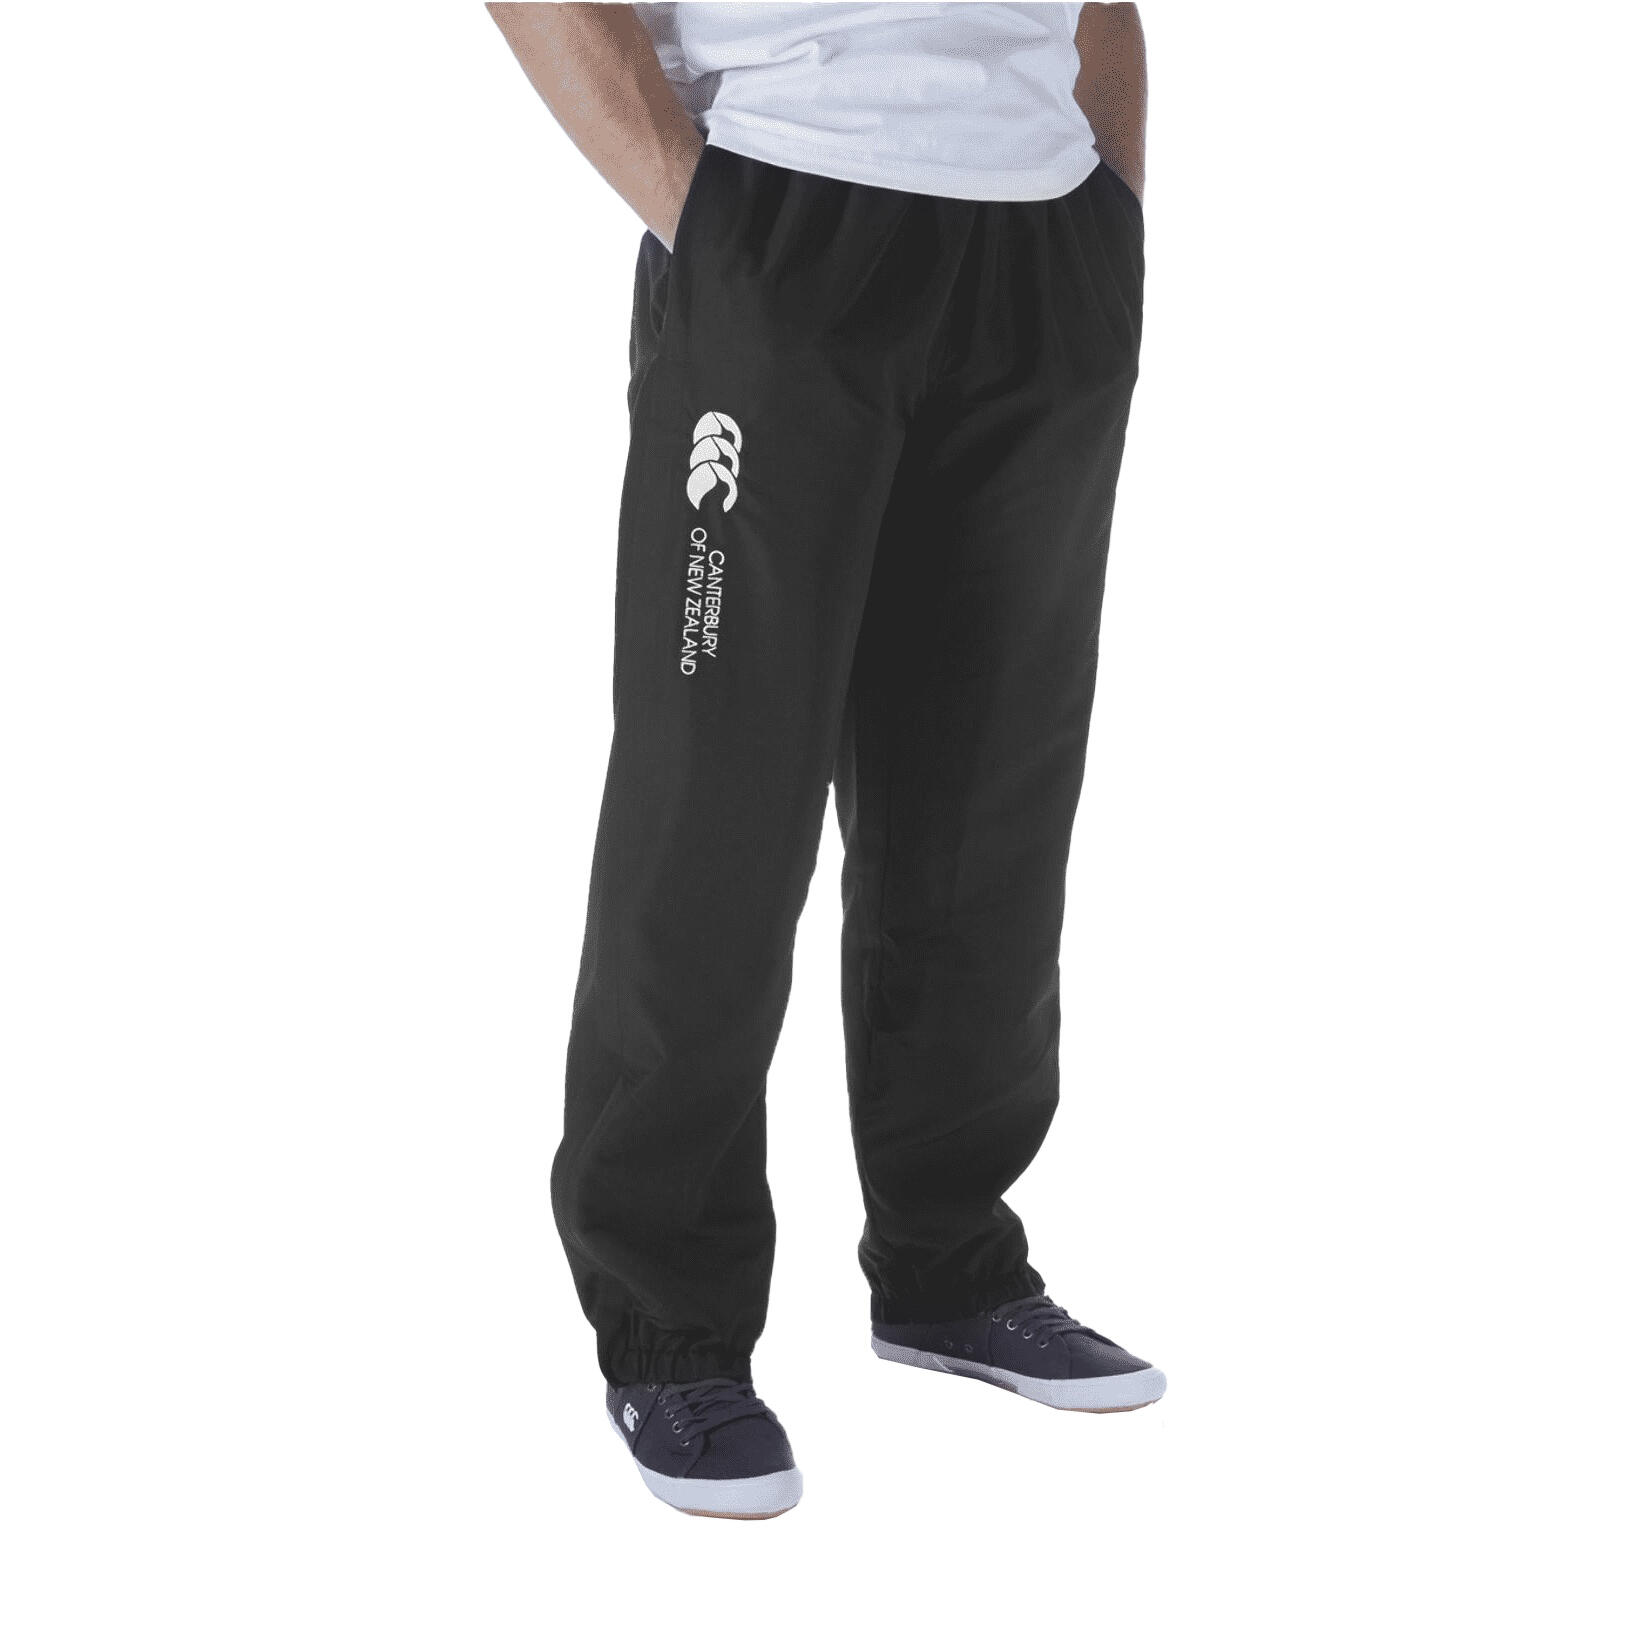 Childrens/Kids Cuffed Ankle Tracksuit Bottoms (Black) 2/3